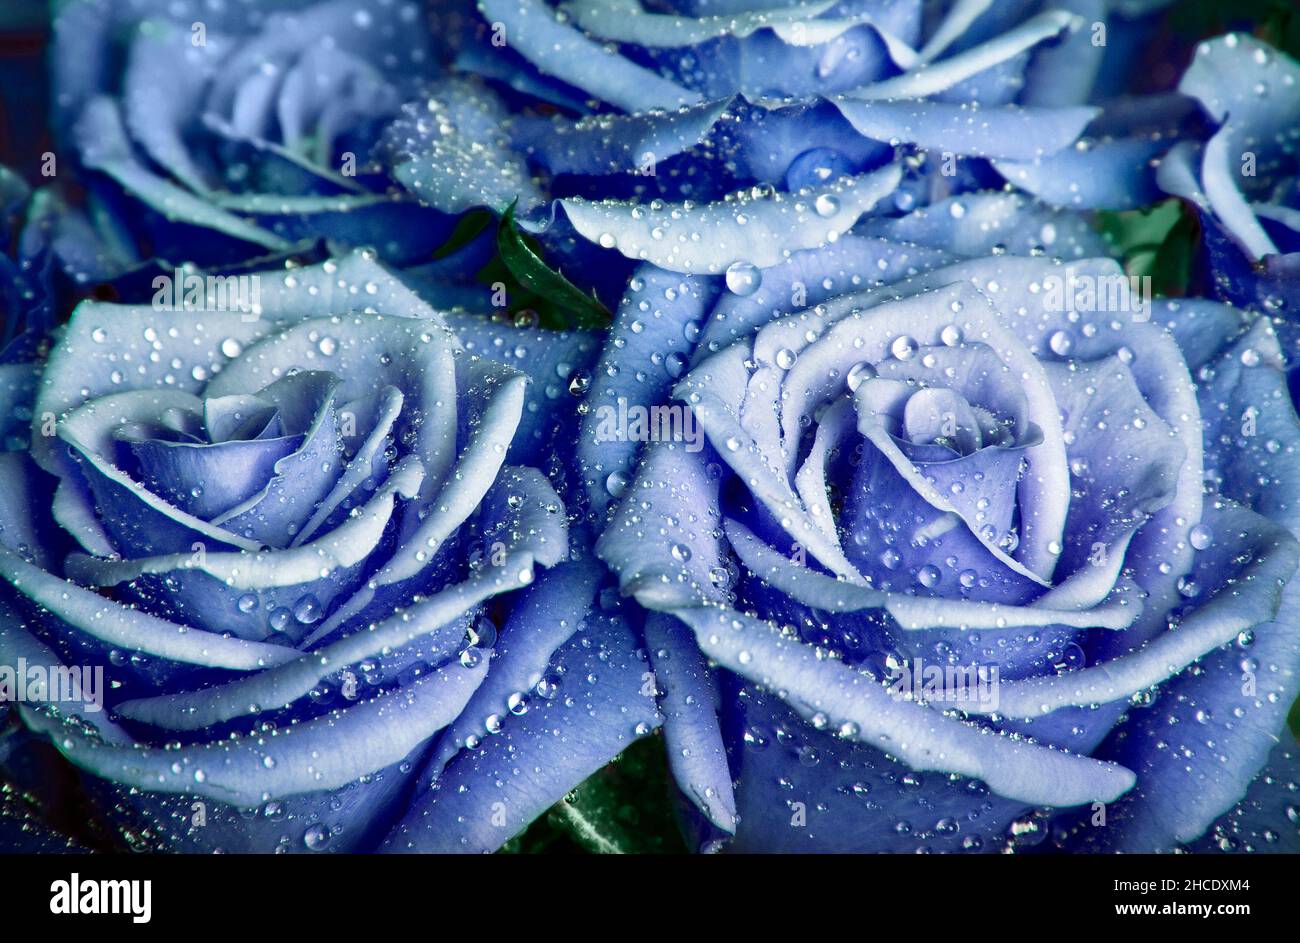 romantic blue roses with drops of water Stock Photo